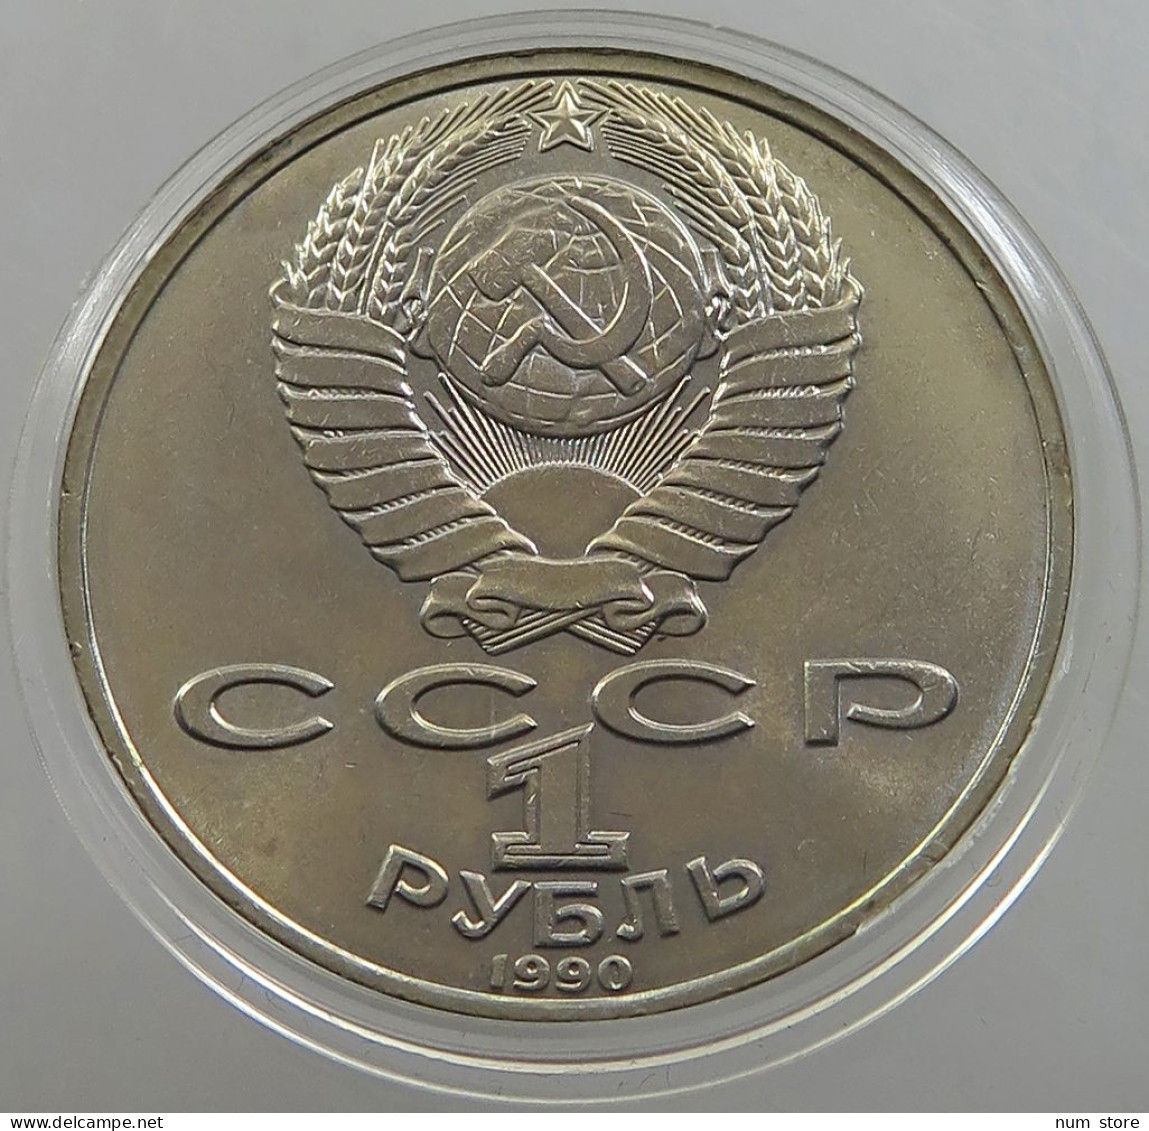 RUSSIA USSR 1 ROUBLE 1990 TSCHECHOW #sm14 0557 - Russia